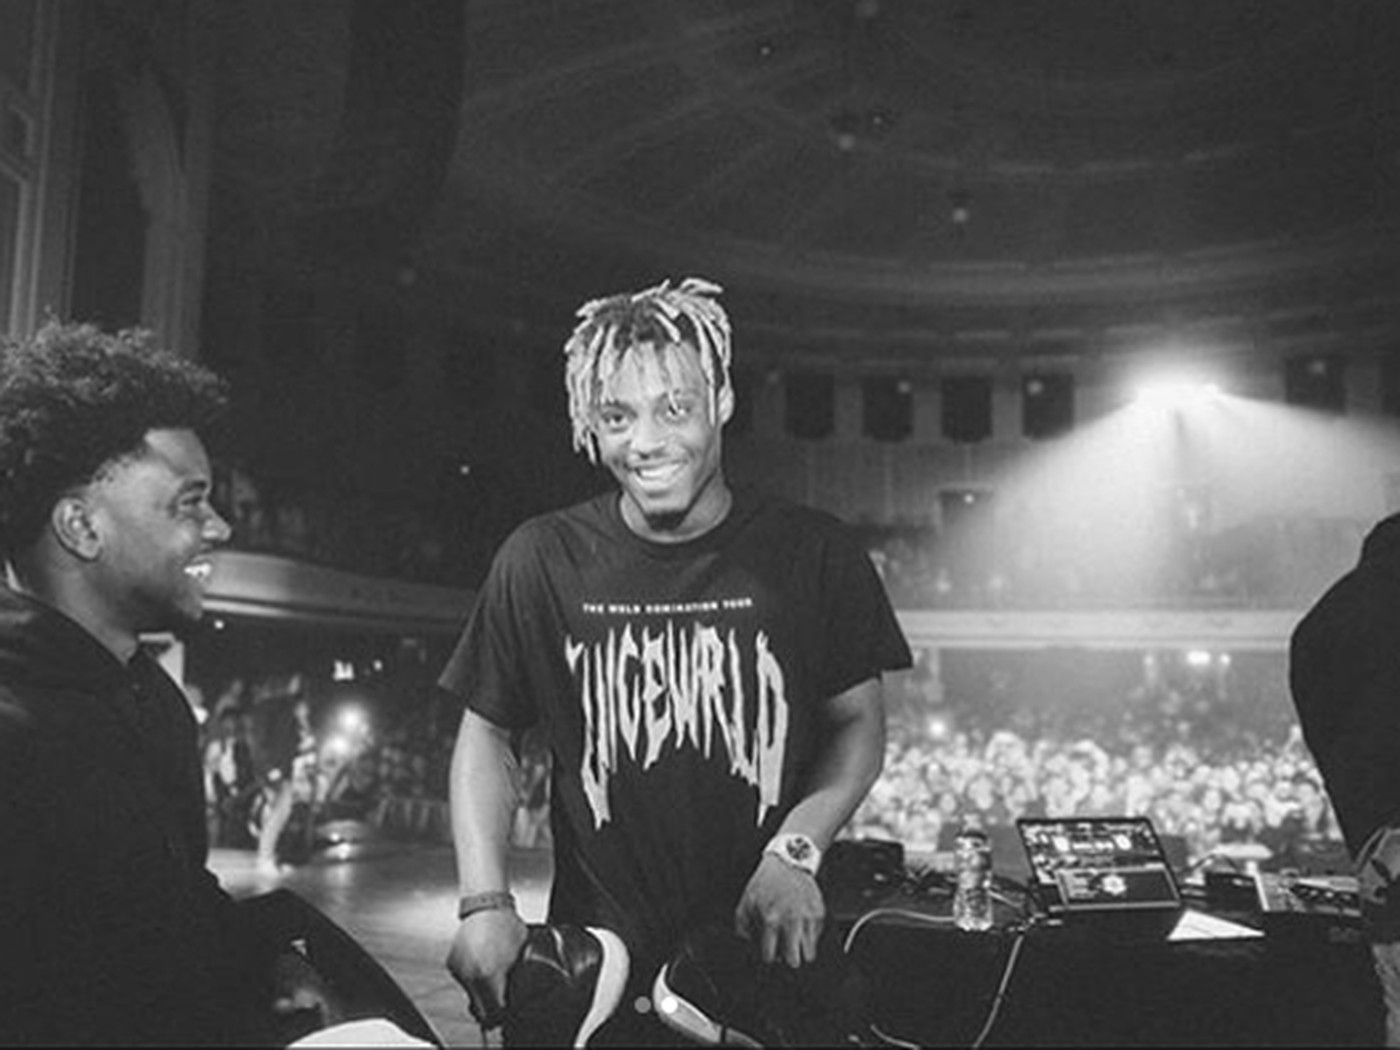 Tour Tales. Peter Jideonwo talks developing Juice WRLD, his last show, and his thousands of unreleased songs